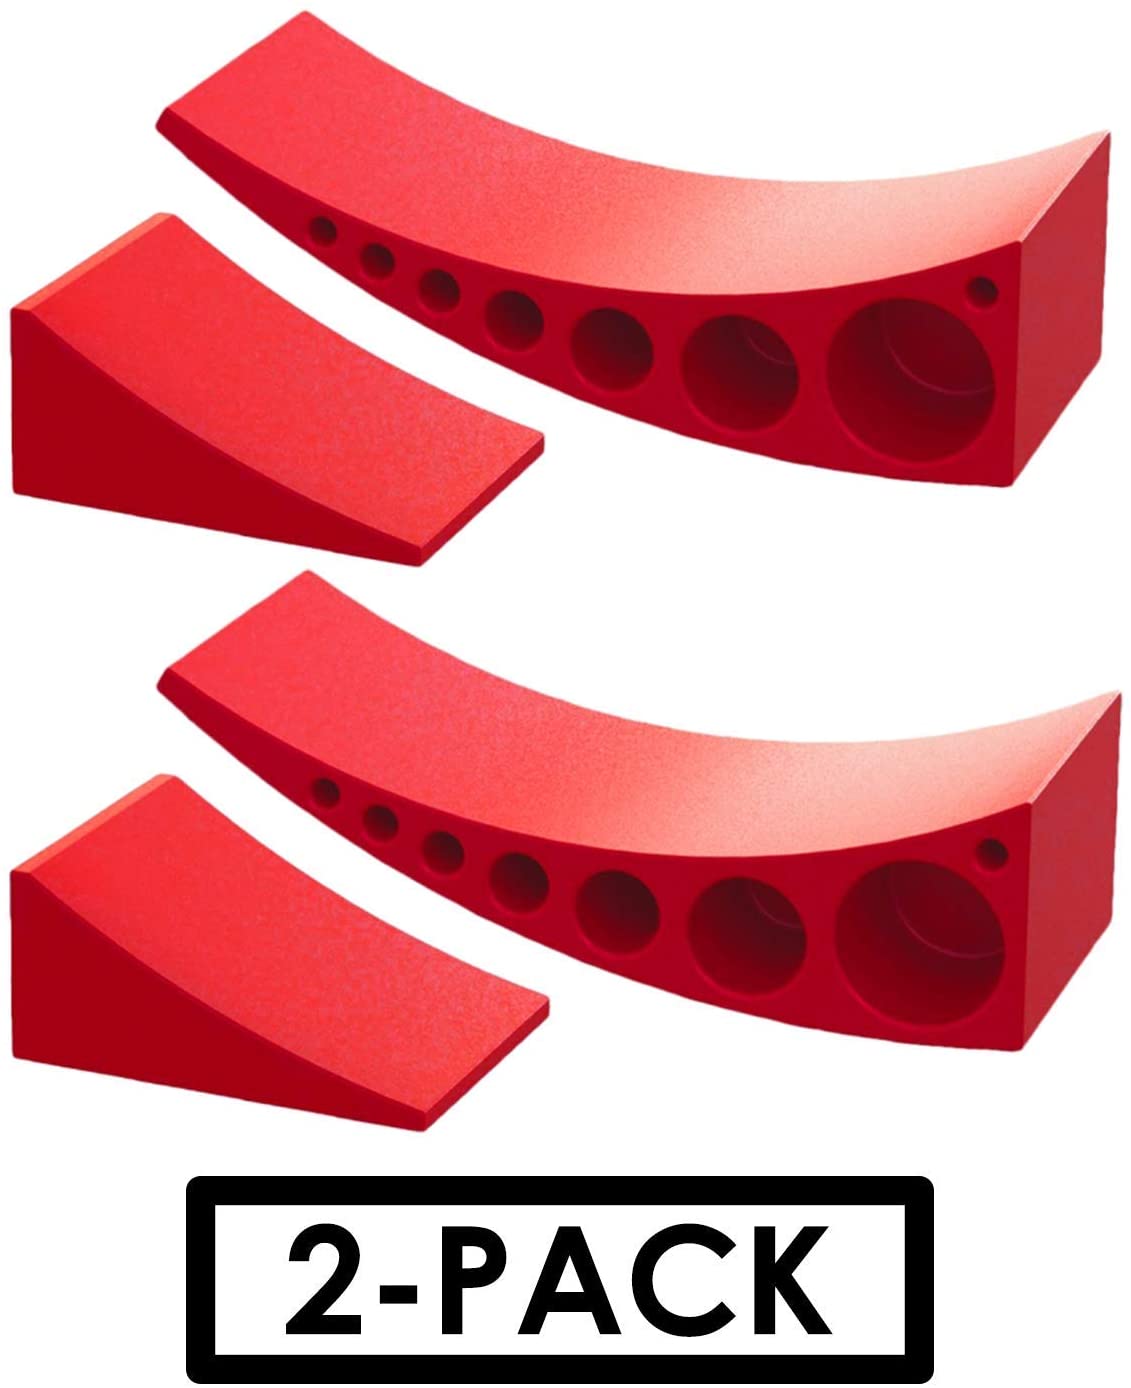 2-Pack Camper Leveler, Chock Kit | Andersen 3604 x2 | Less Than 5 Minutes to Level Your Camper or Trailer | Levelers for RV | Simply Drive On. Chock. Done. | Faster and Easier Than RV Leveling Blocks! (2)